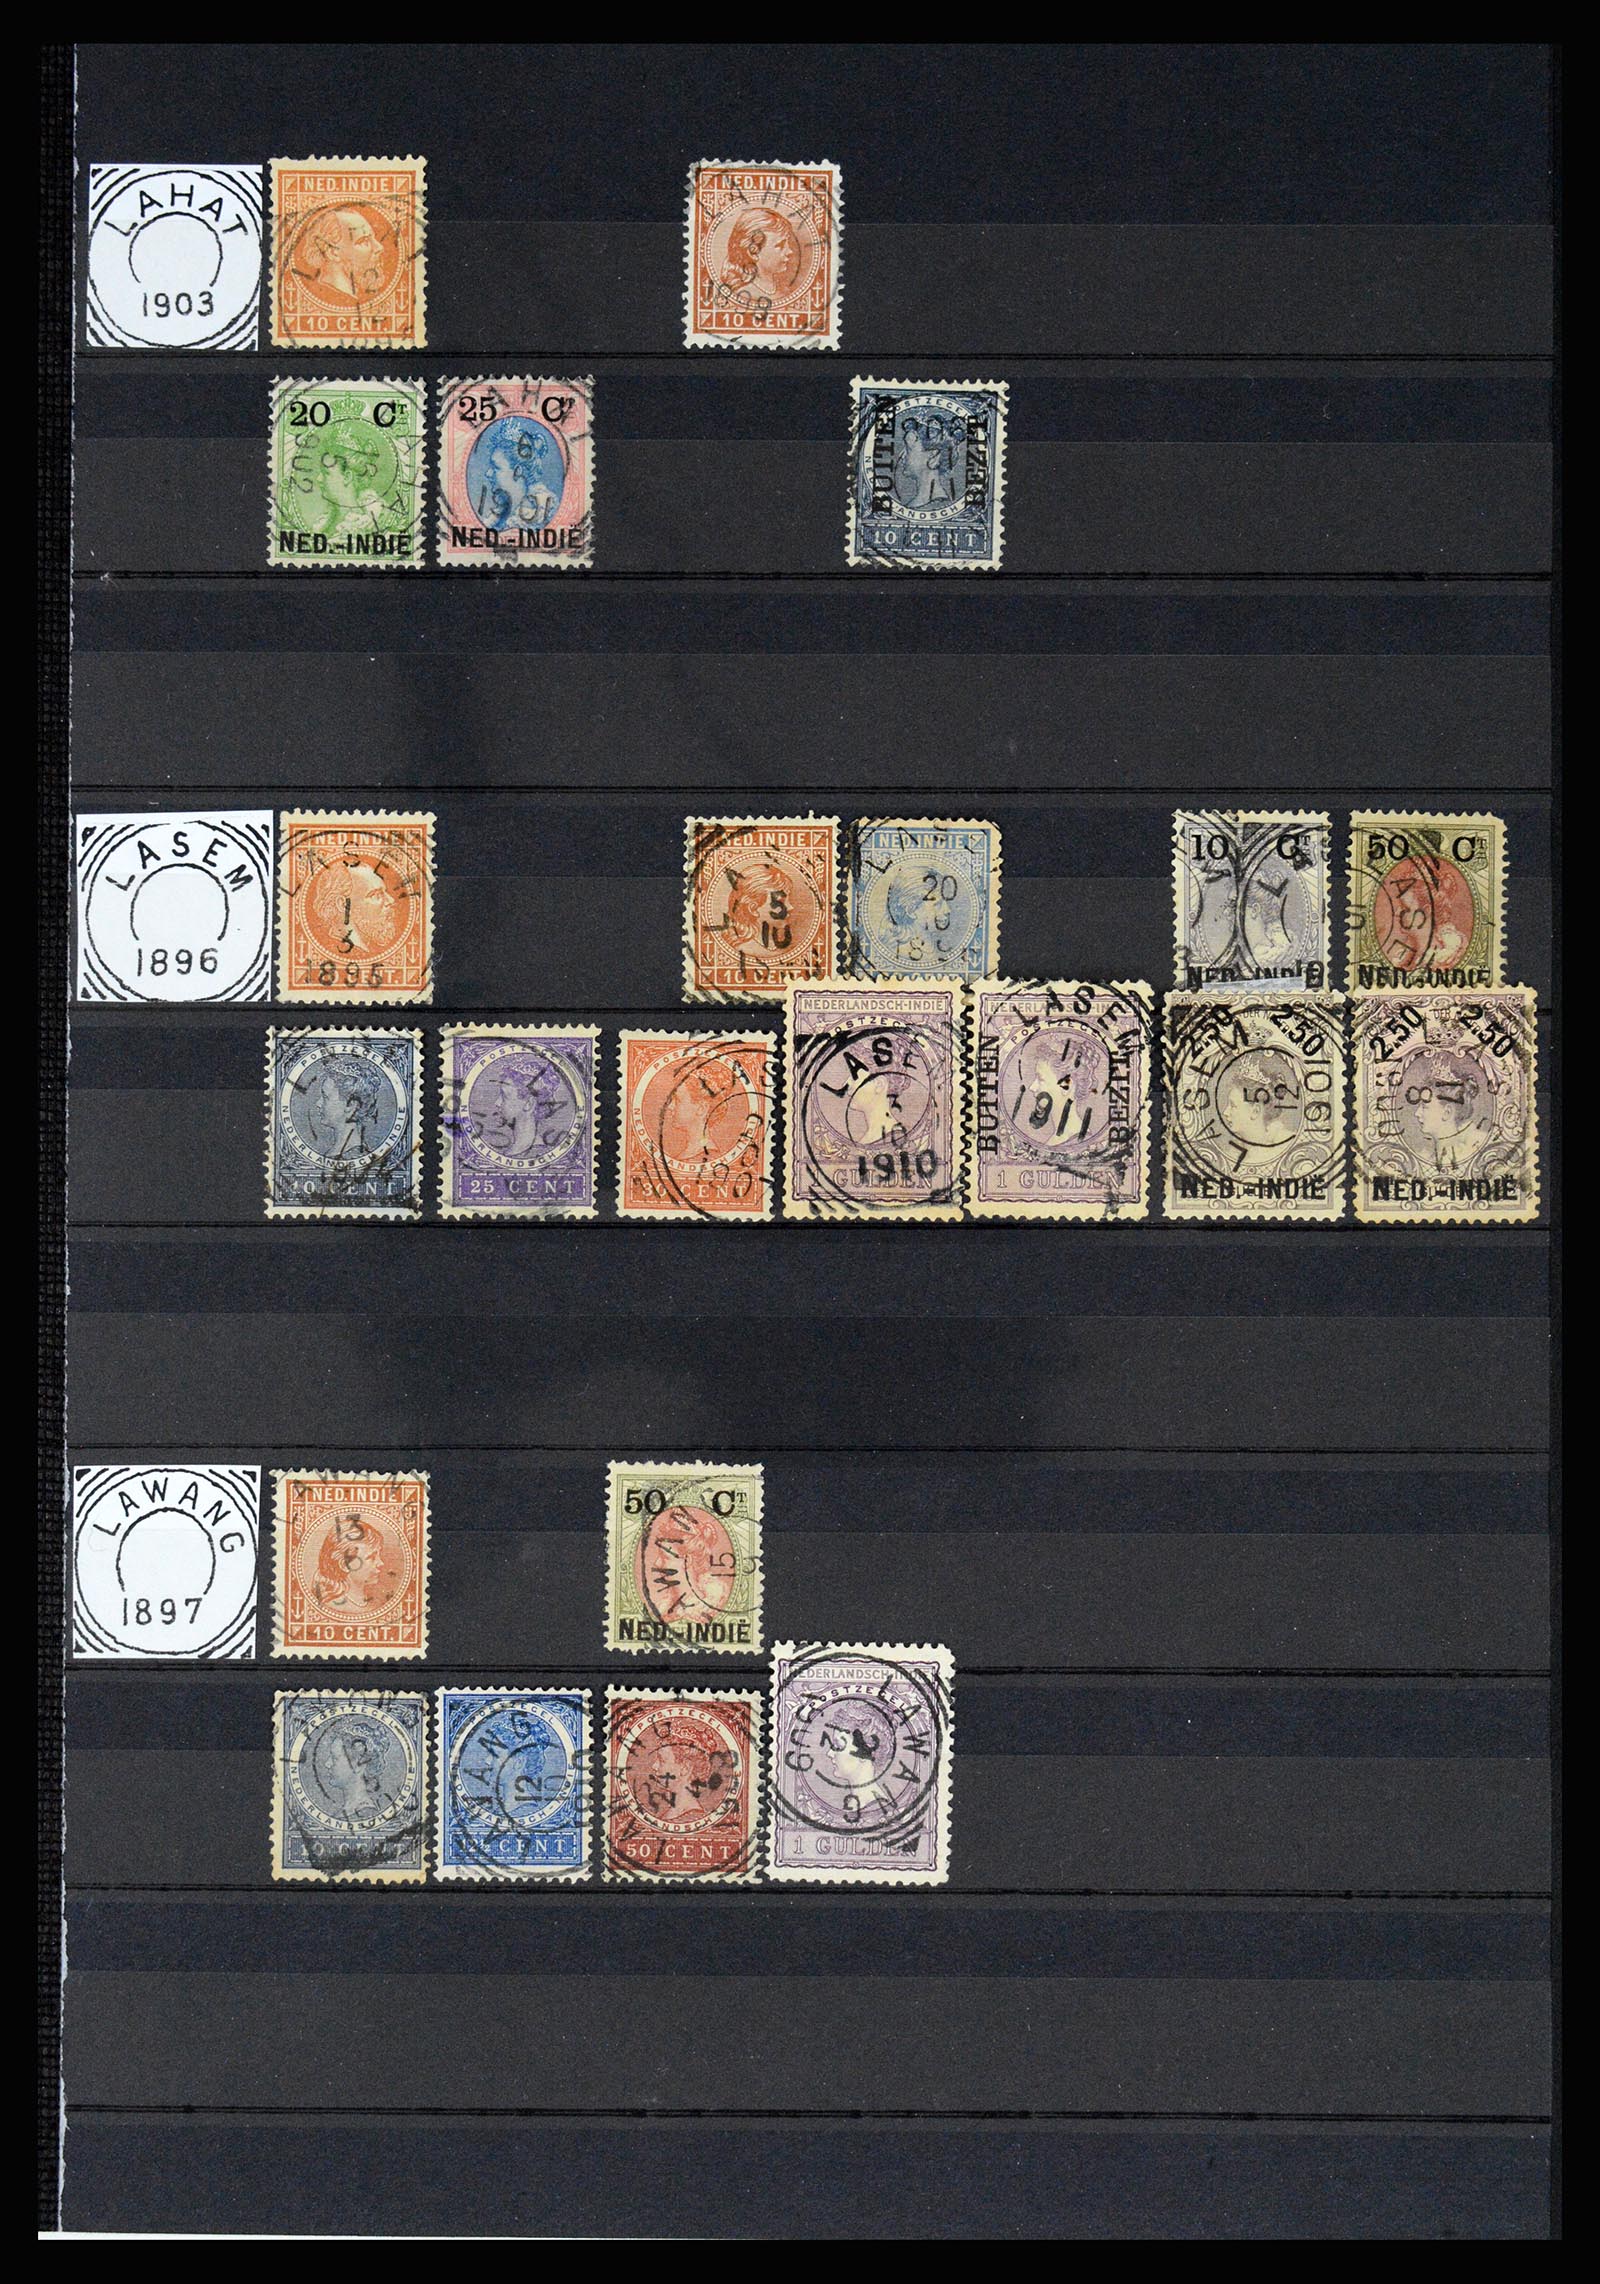 36839 024 - Stamp collection 36839 Dutch east Indies square cancels.